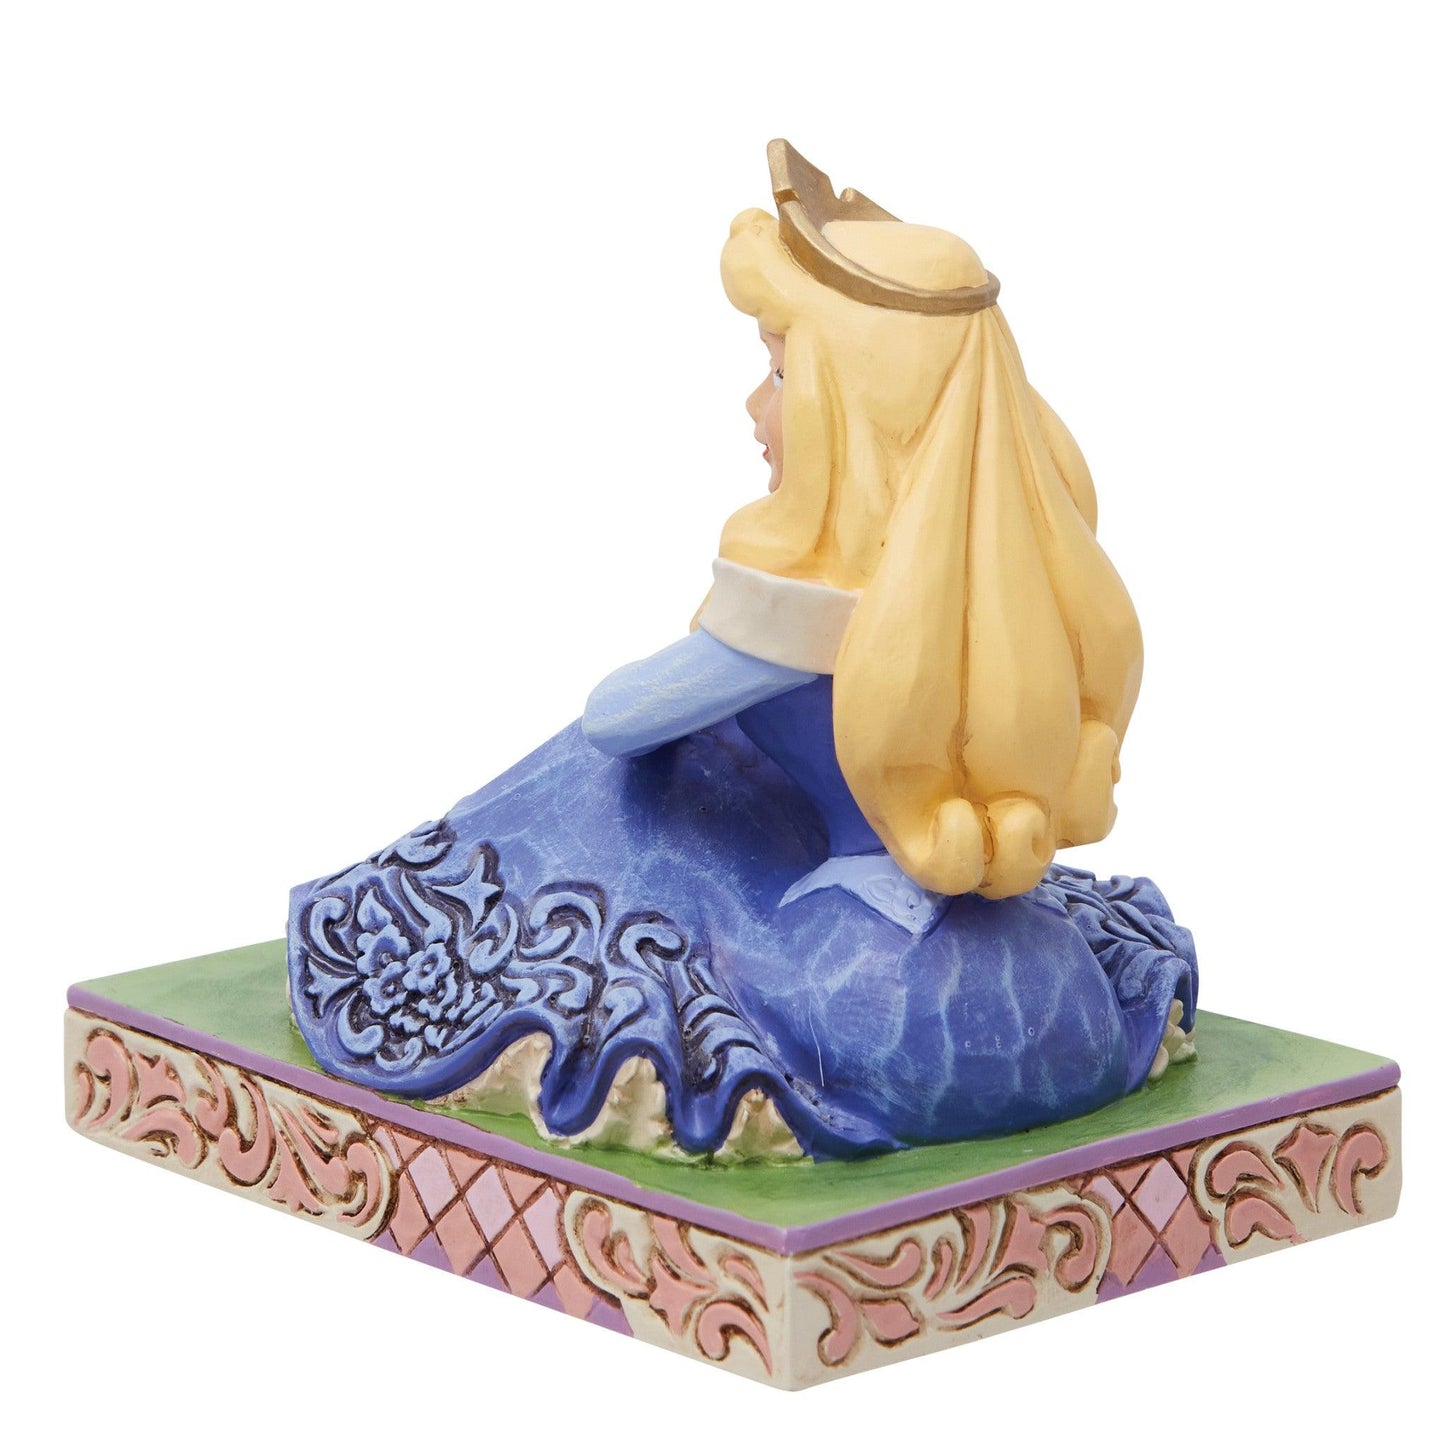 Aurora Personality Pose Figurine - Gallery Gifts Online 